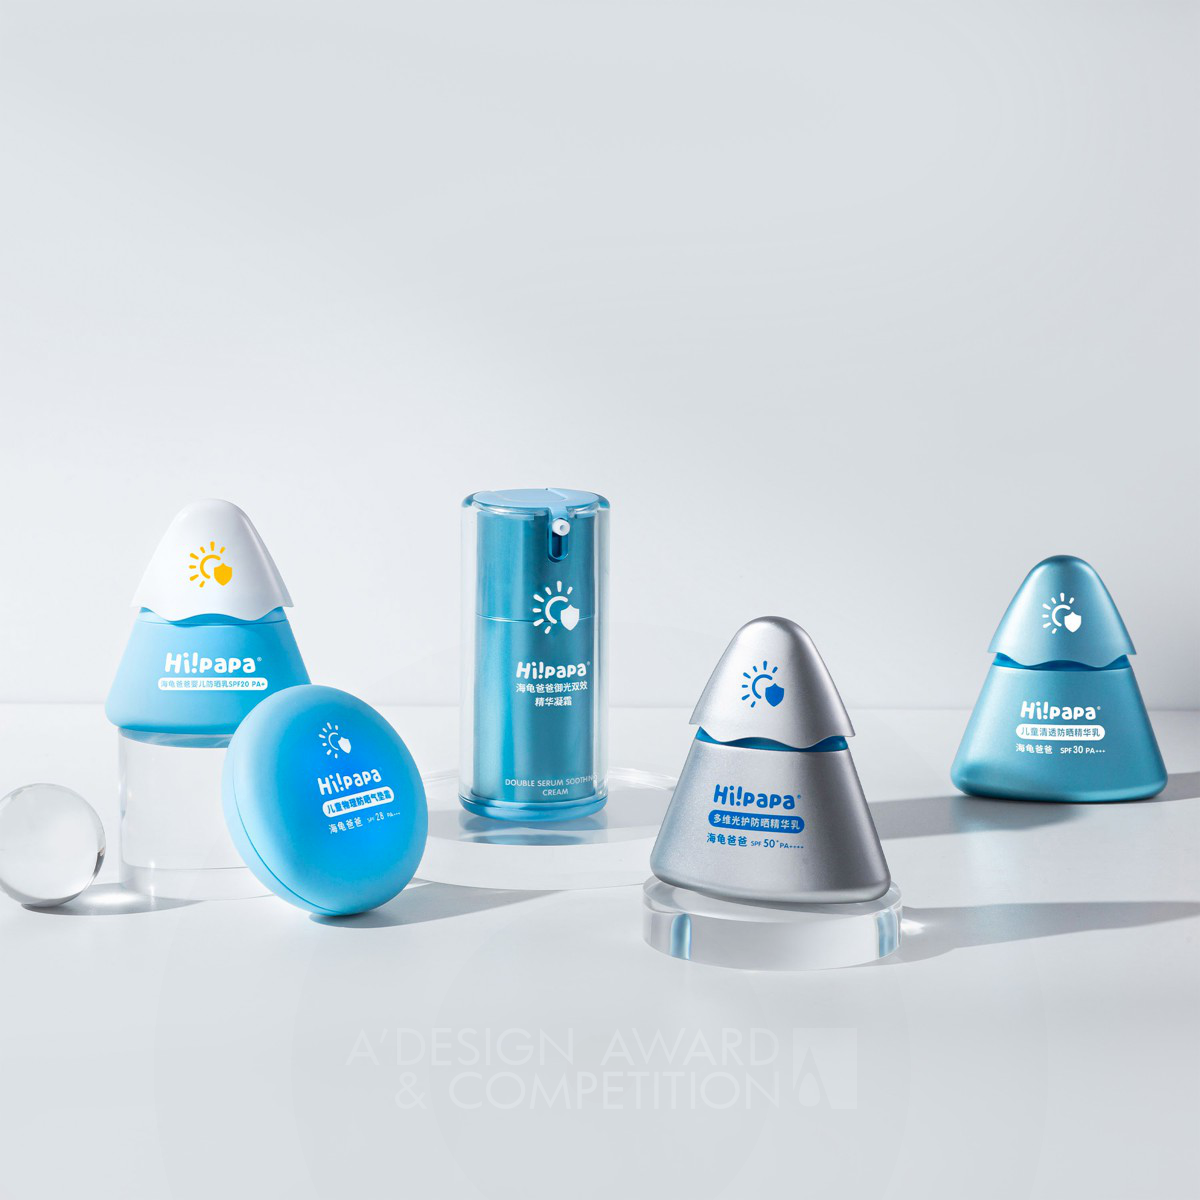 Guangzhou good skin Technology Co., Ltd wins Silver at the prestigious A' Packaging Design Award with Anti Sun Damage Series for Children Packaging.